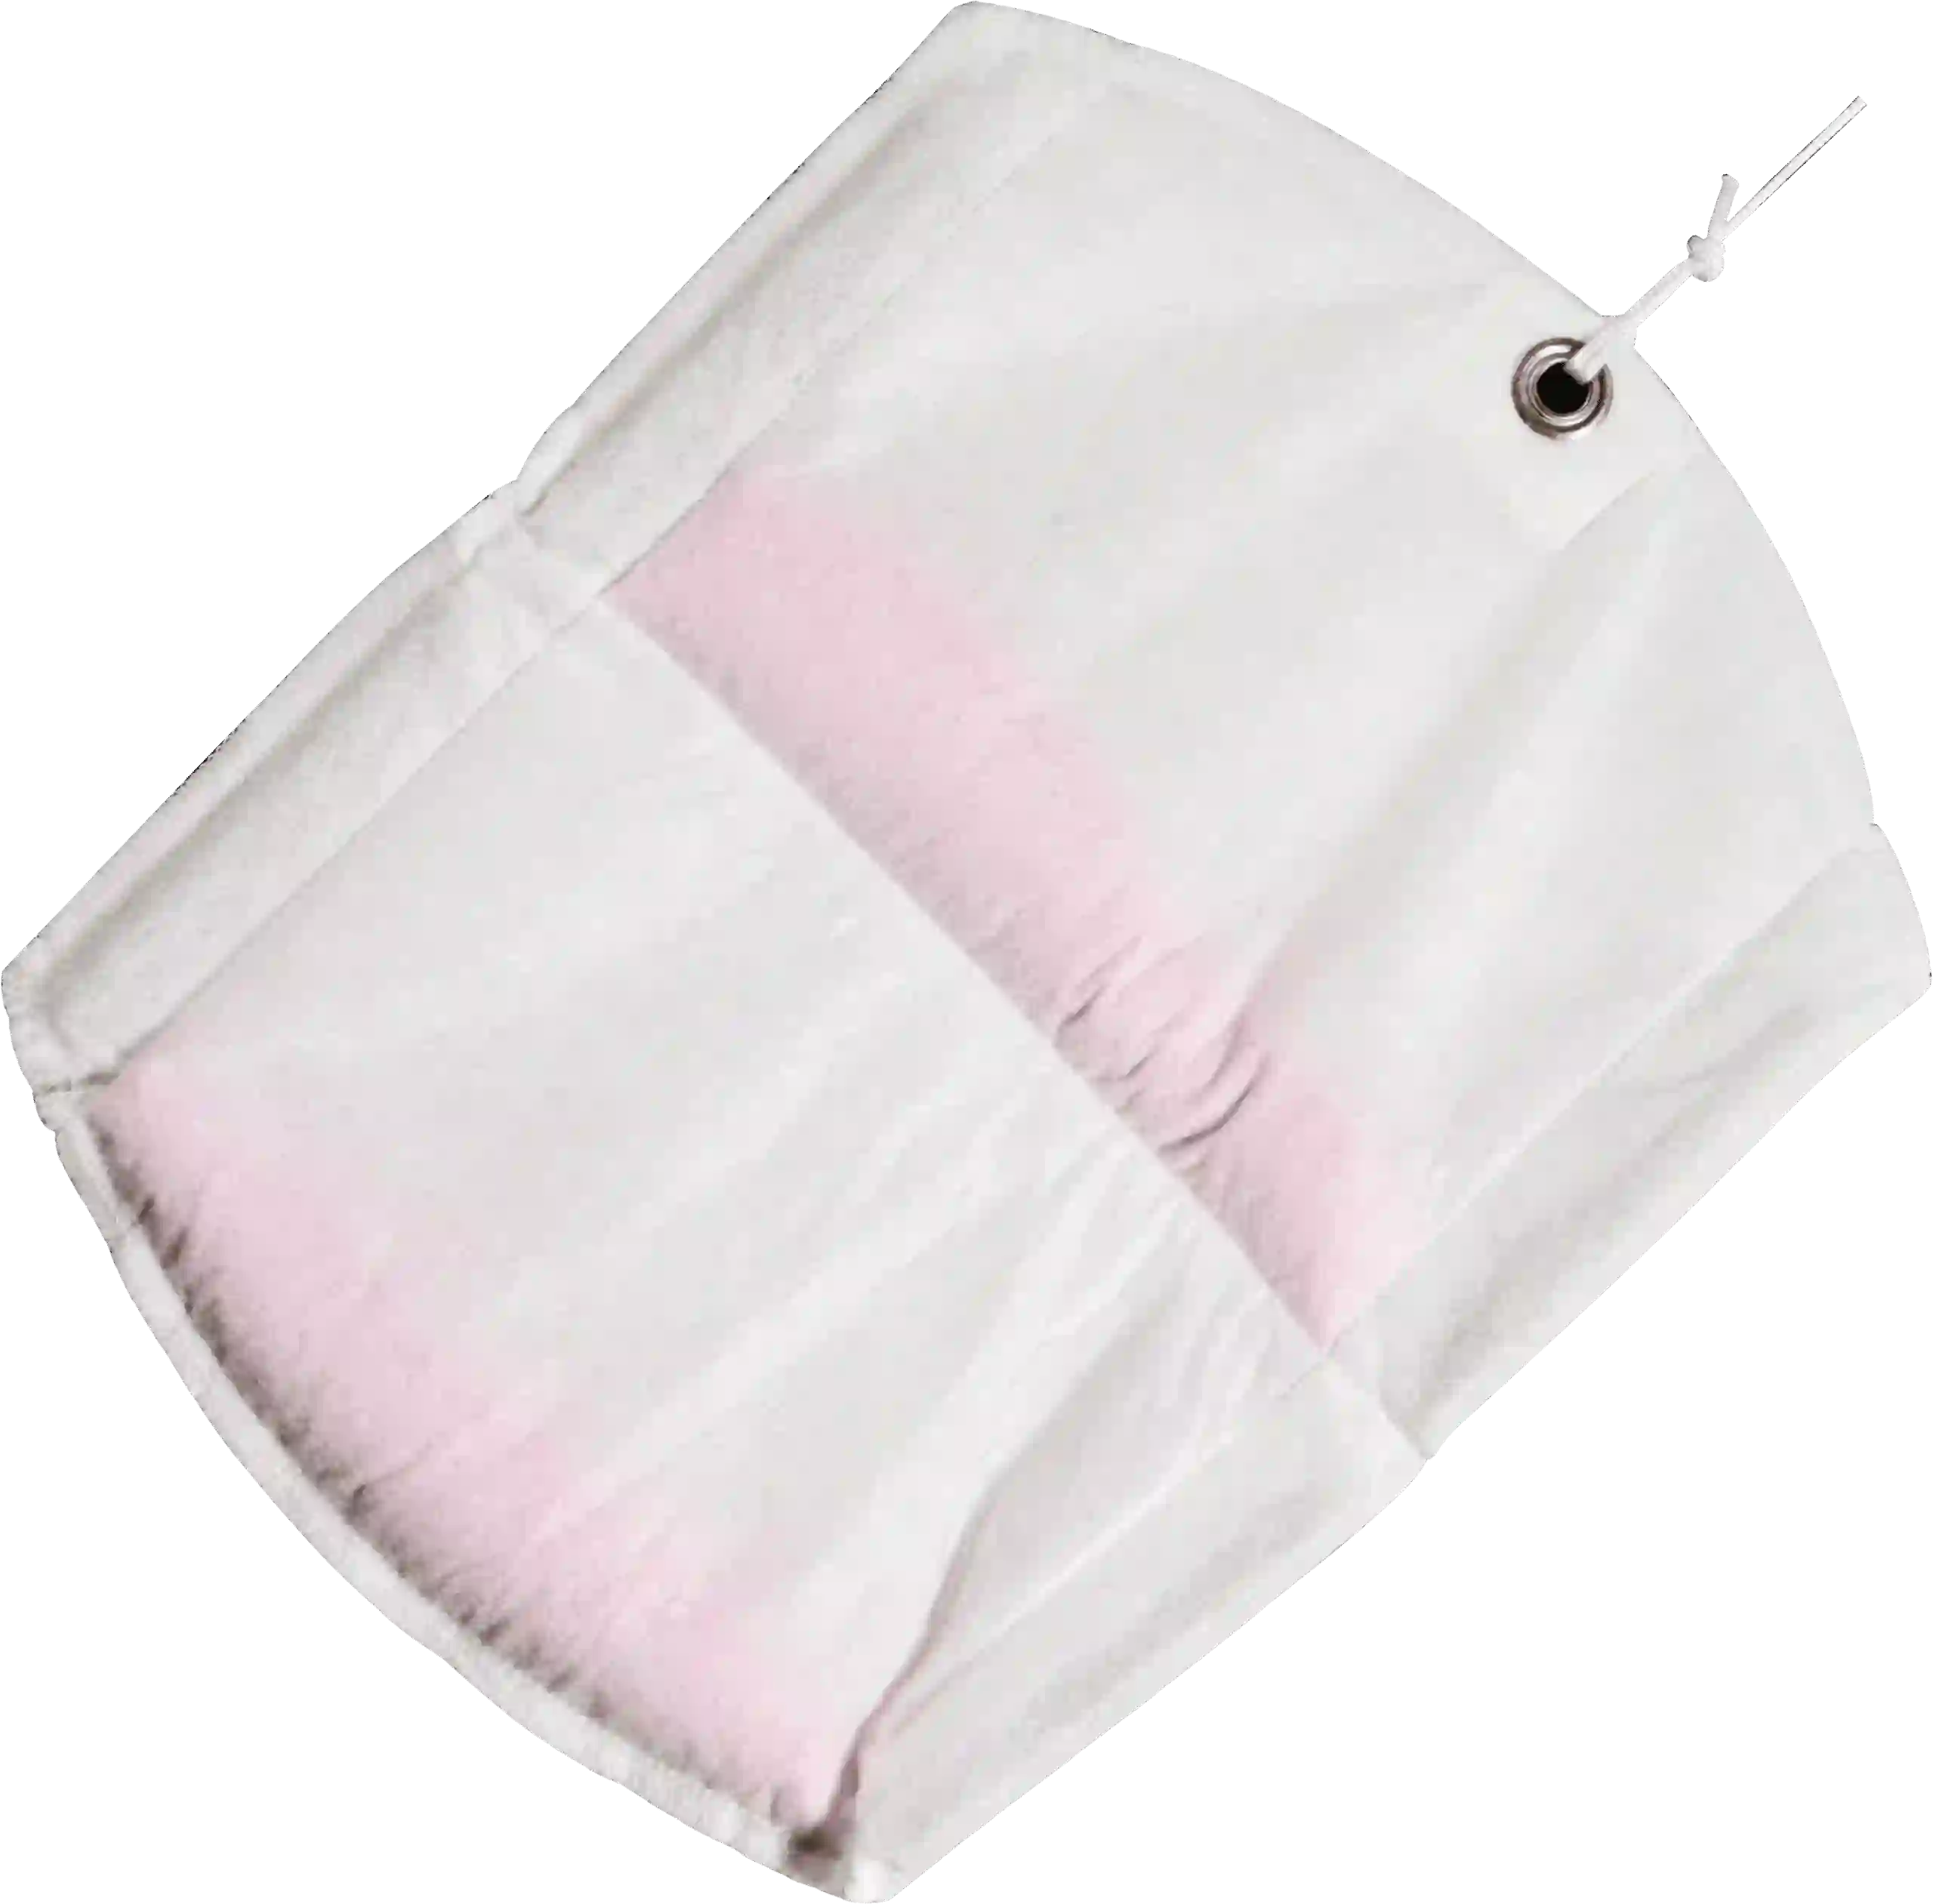 Canvas bag with a pink interior